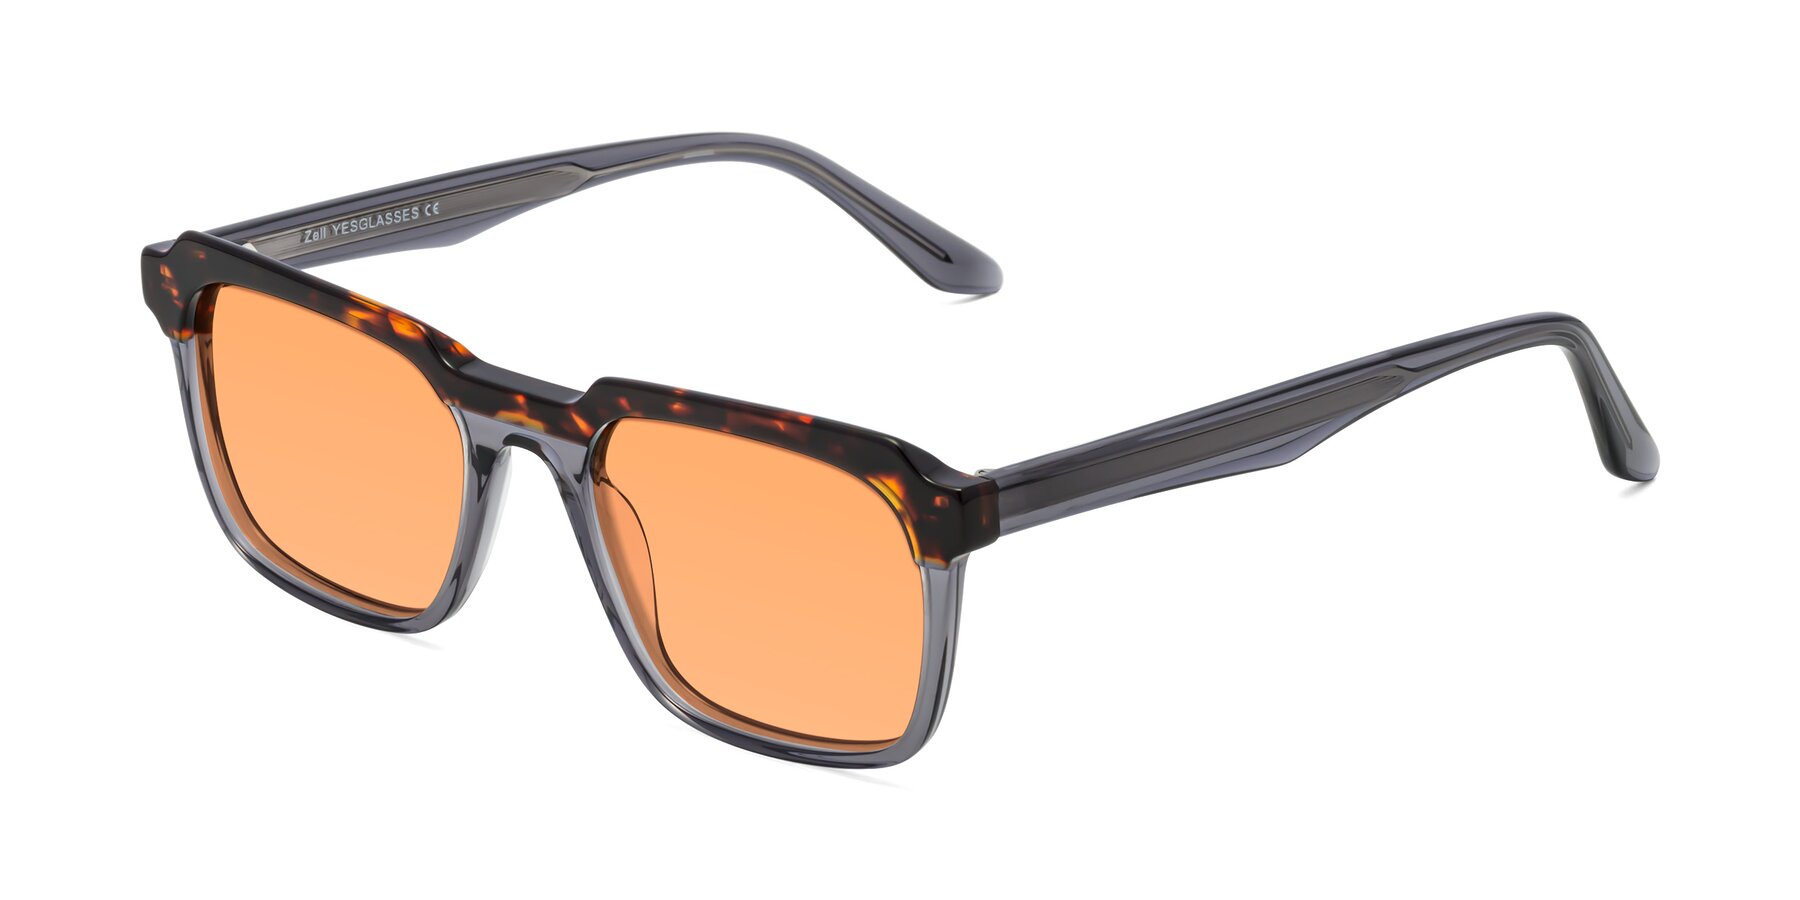 Angle of Zell in Tortoise/Gray with Medium Orange Tinted Lenses